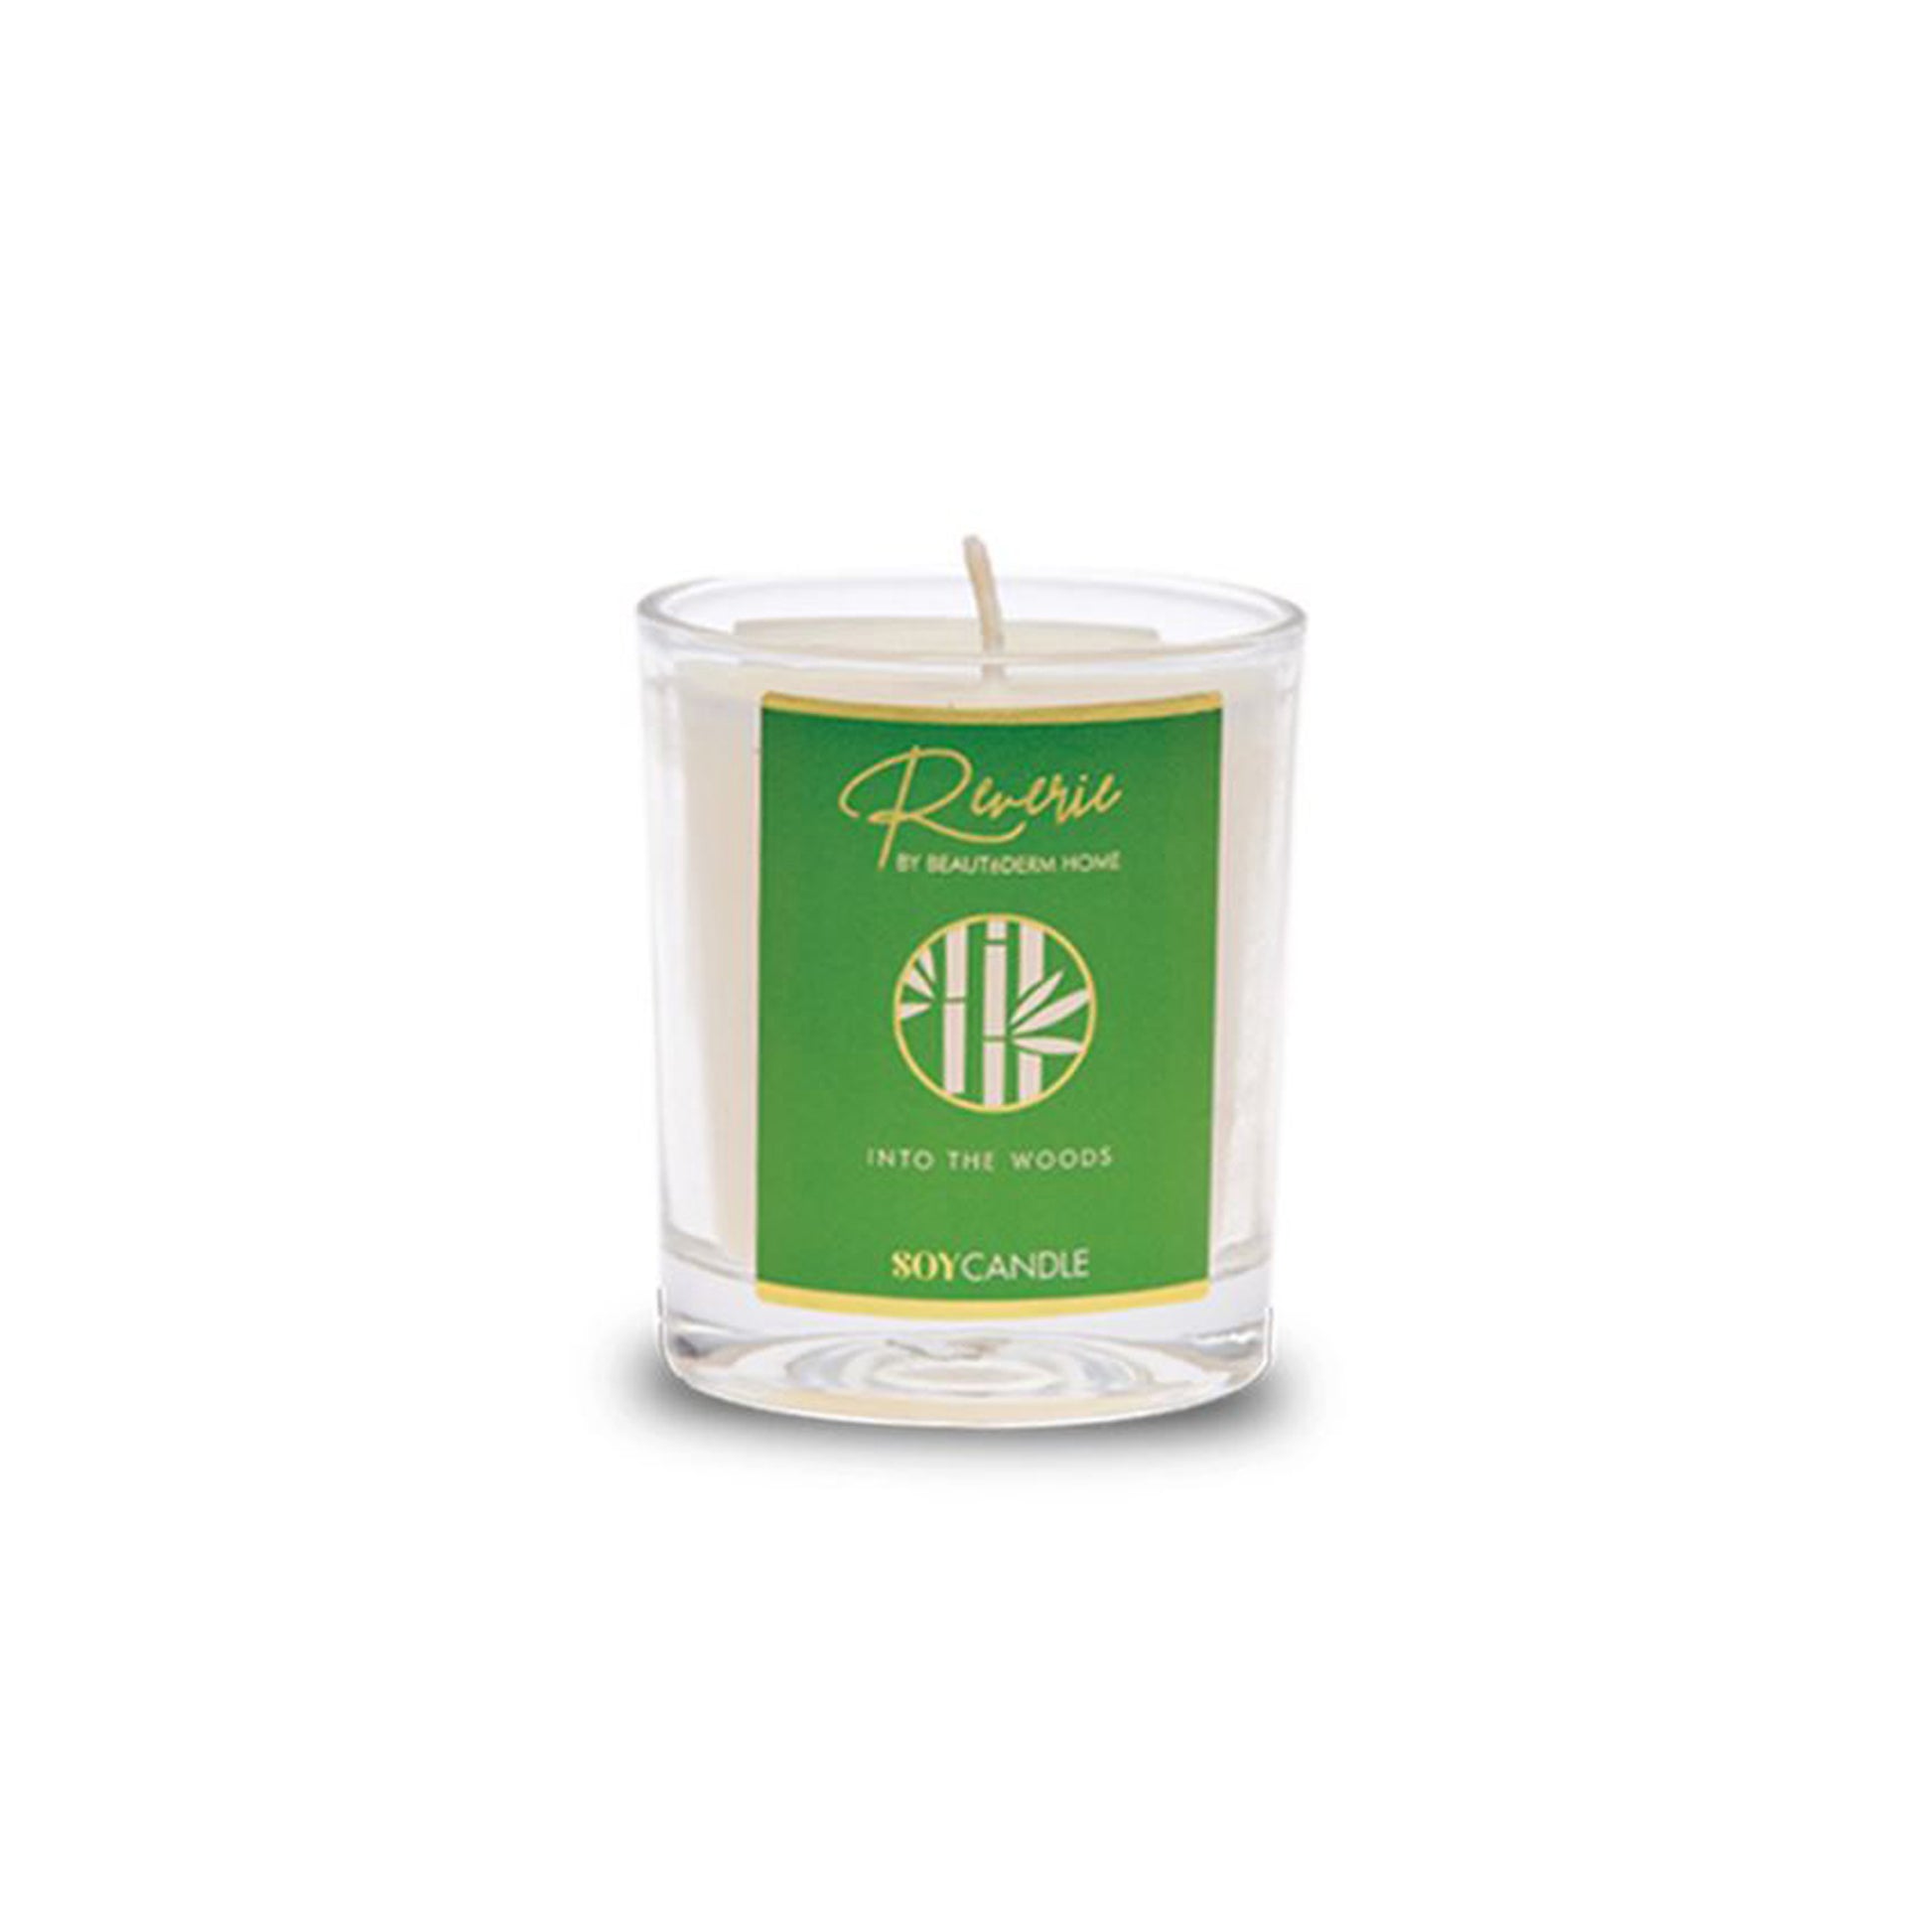 Beautederm Home Reverie Soy Candle Scent Into the Woods